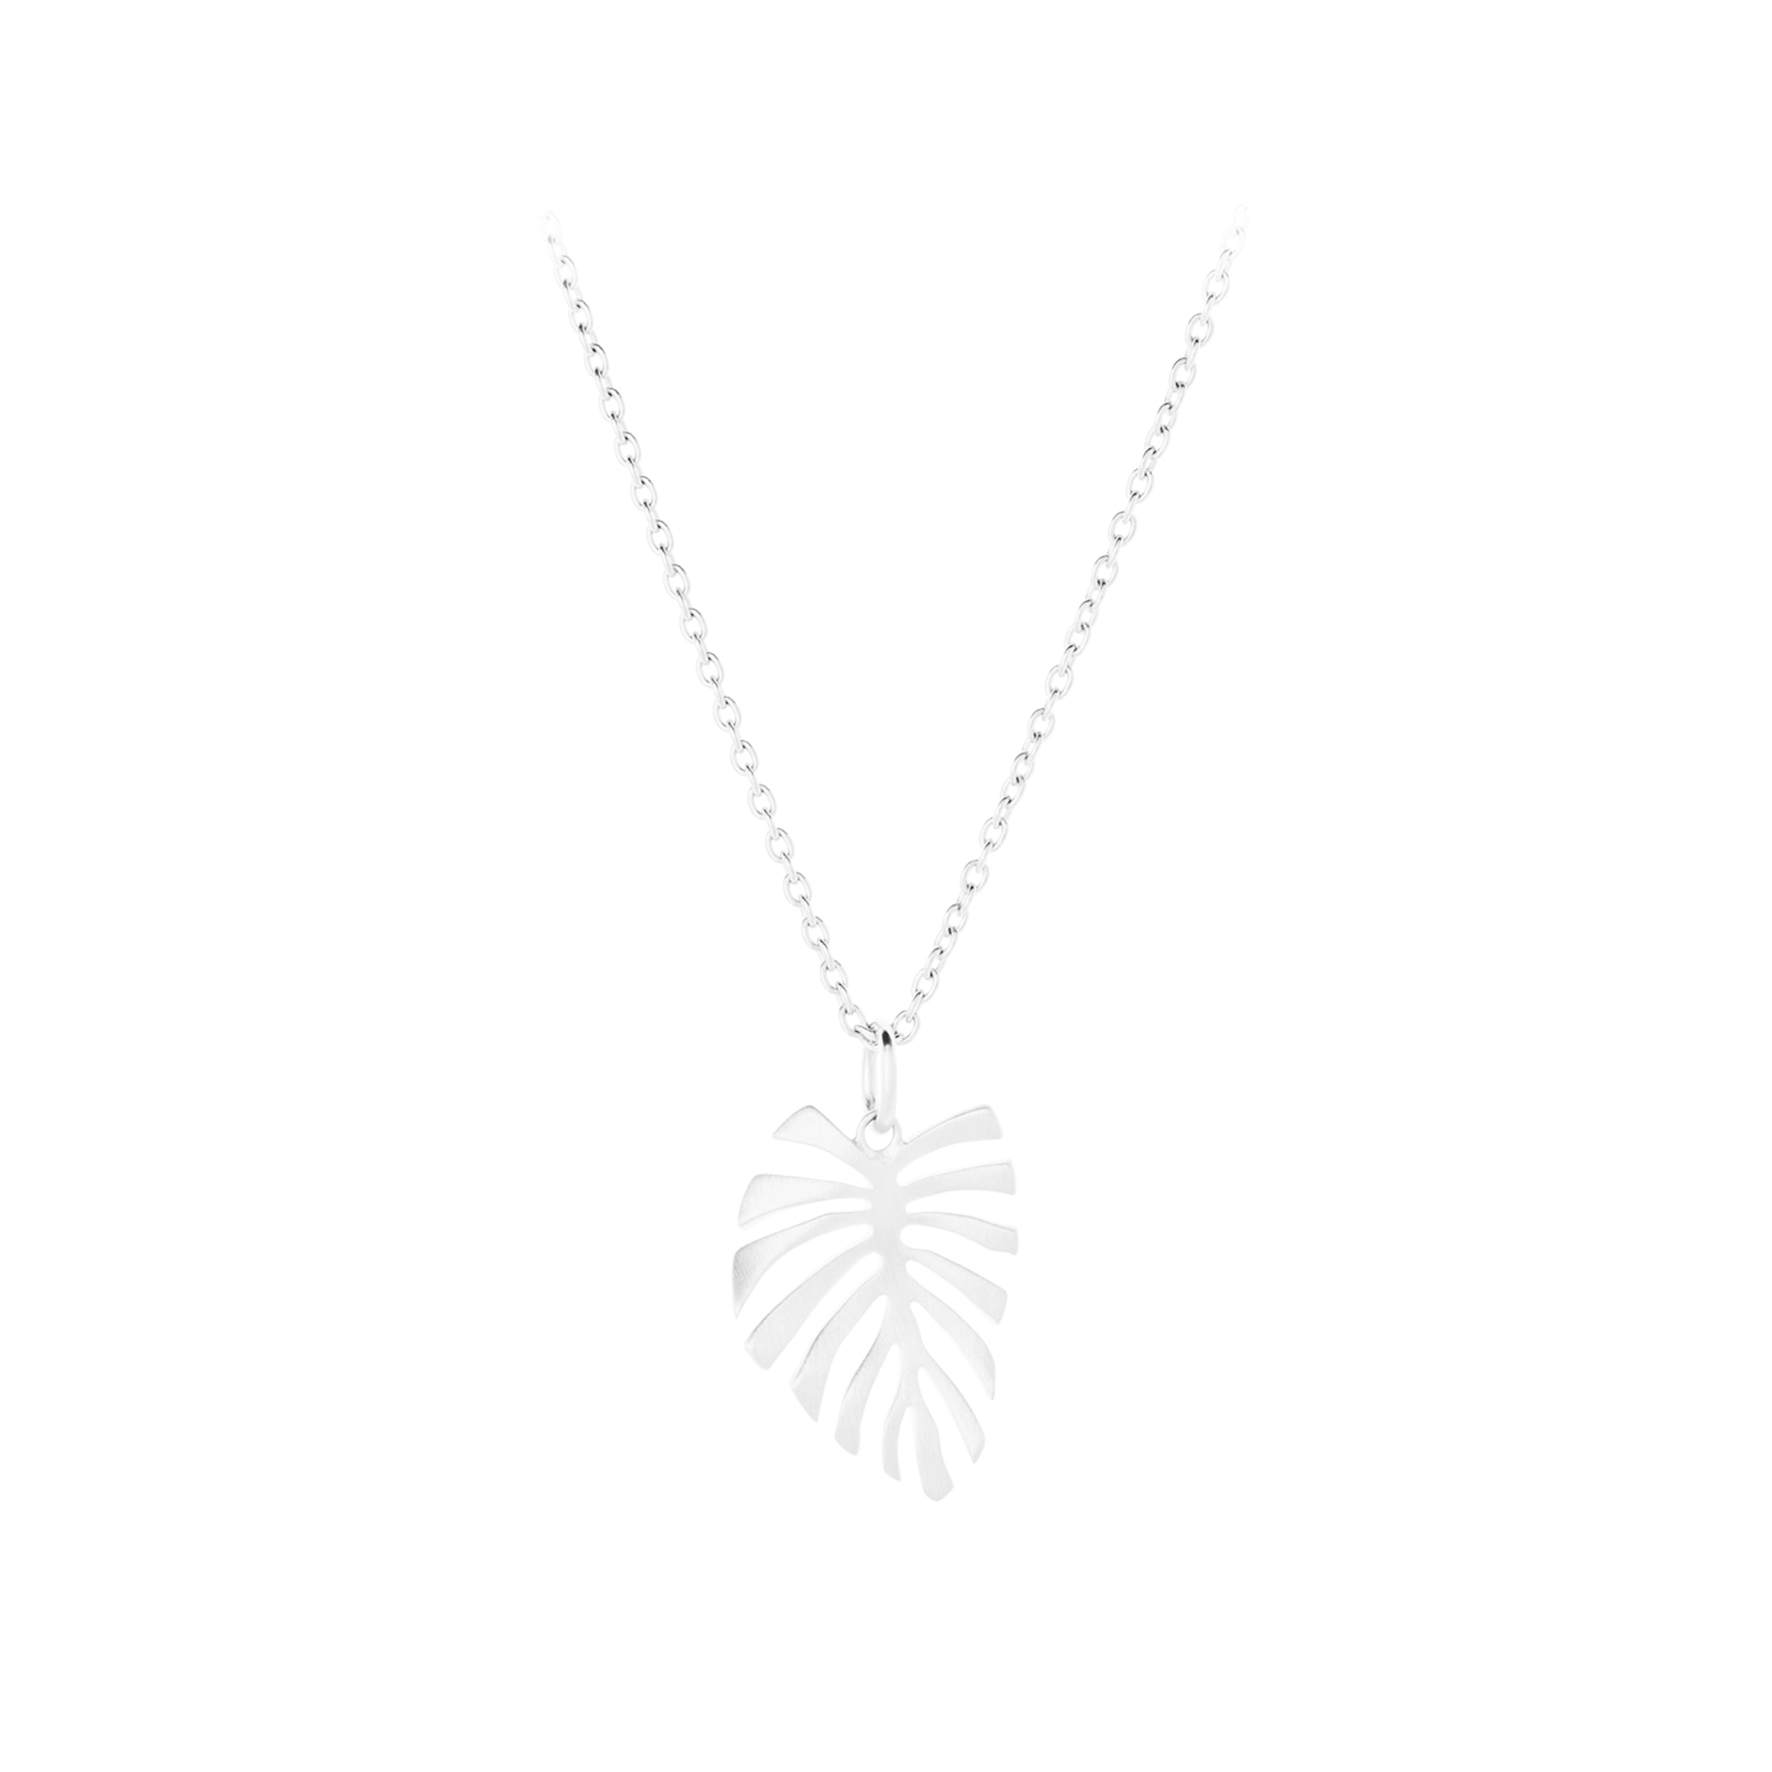 Fern Leaf Necklace from Pernille Corydon in Silver Sterling 925